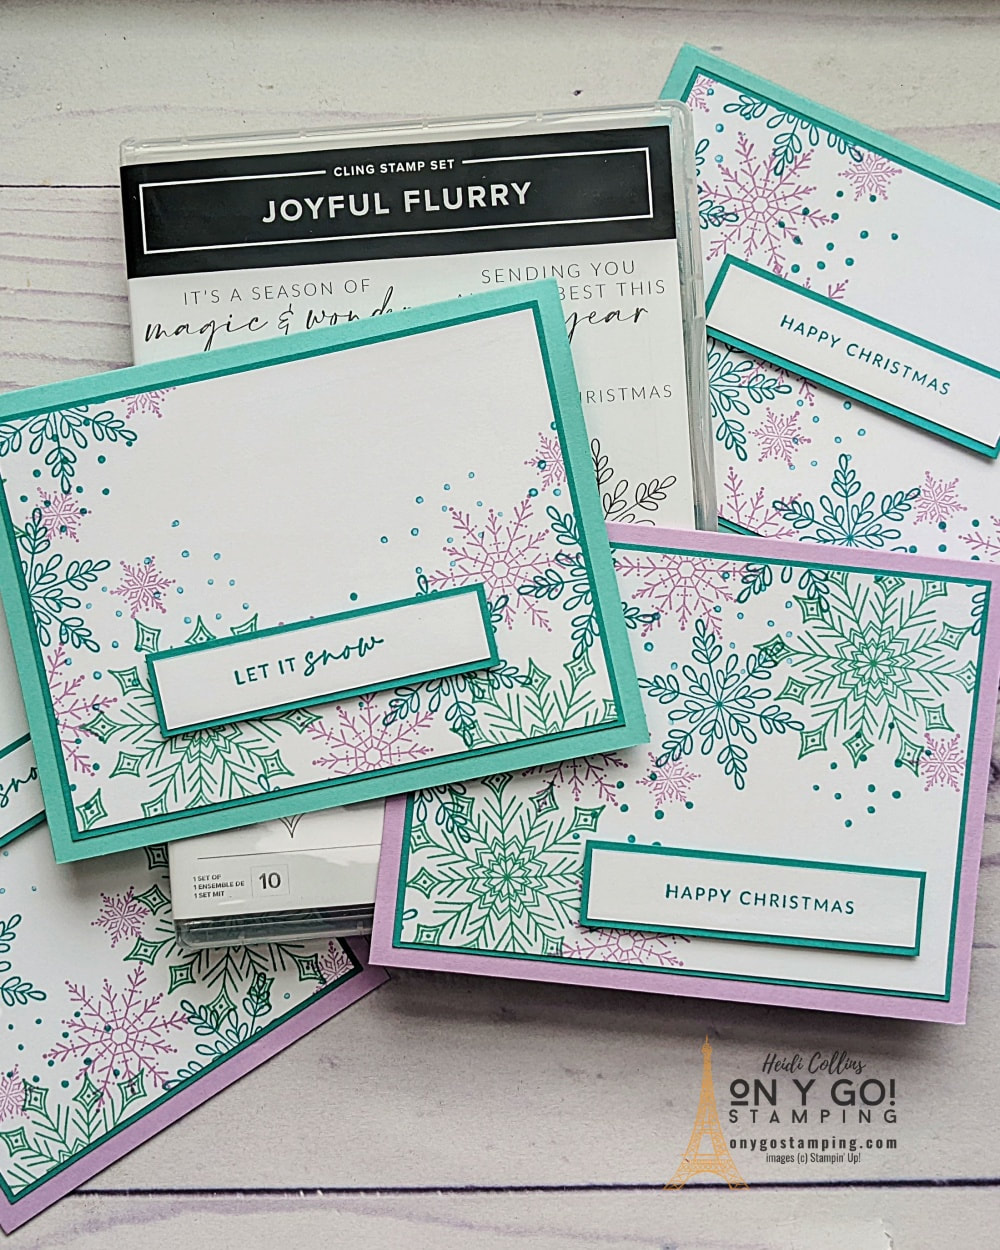 Create quick and easy handmade holiday cards with the Joyful Flurry stamp set from Stampin' Up!, a couple of ink pads, and some cardstock.